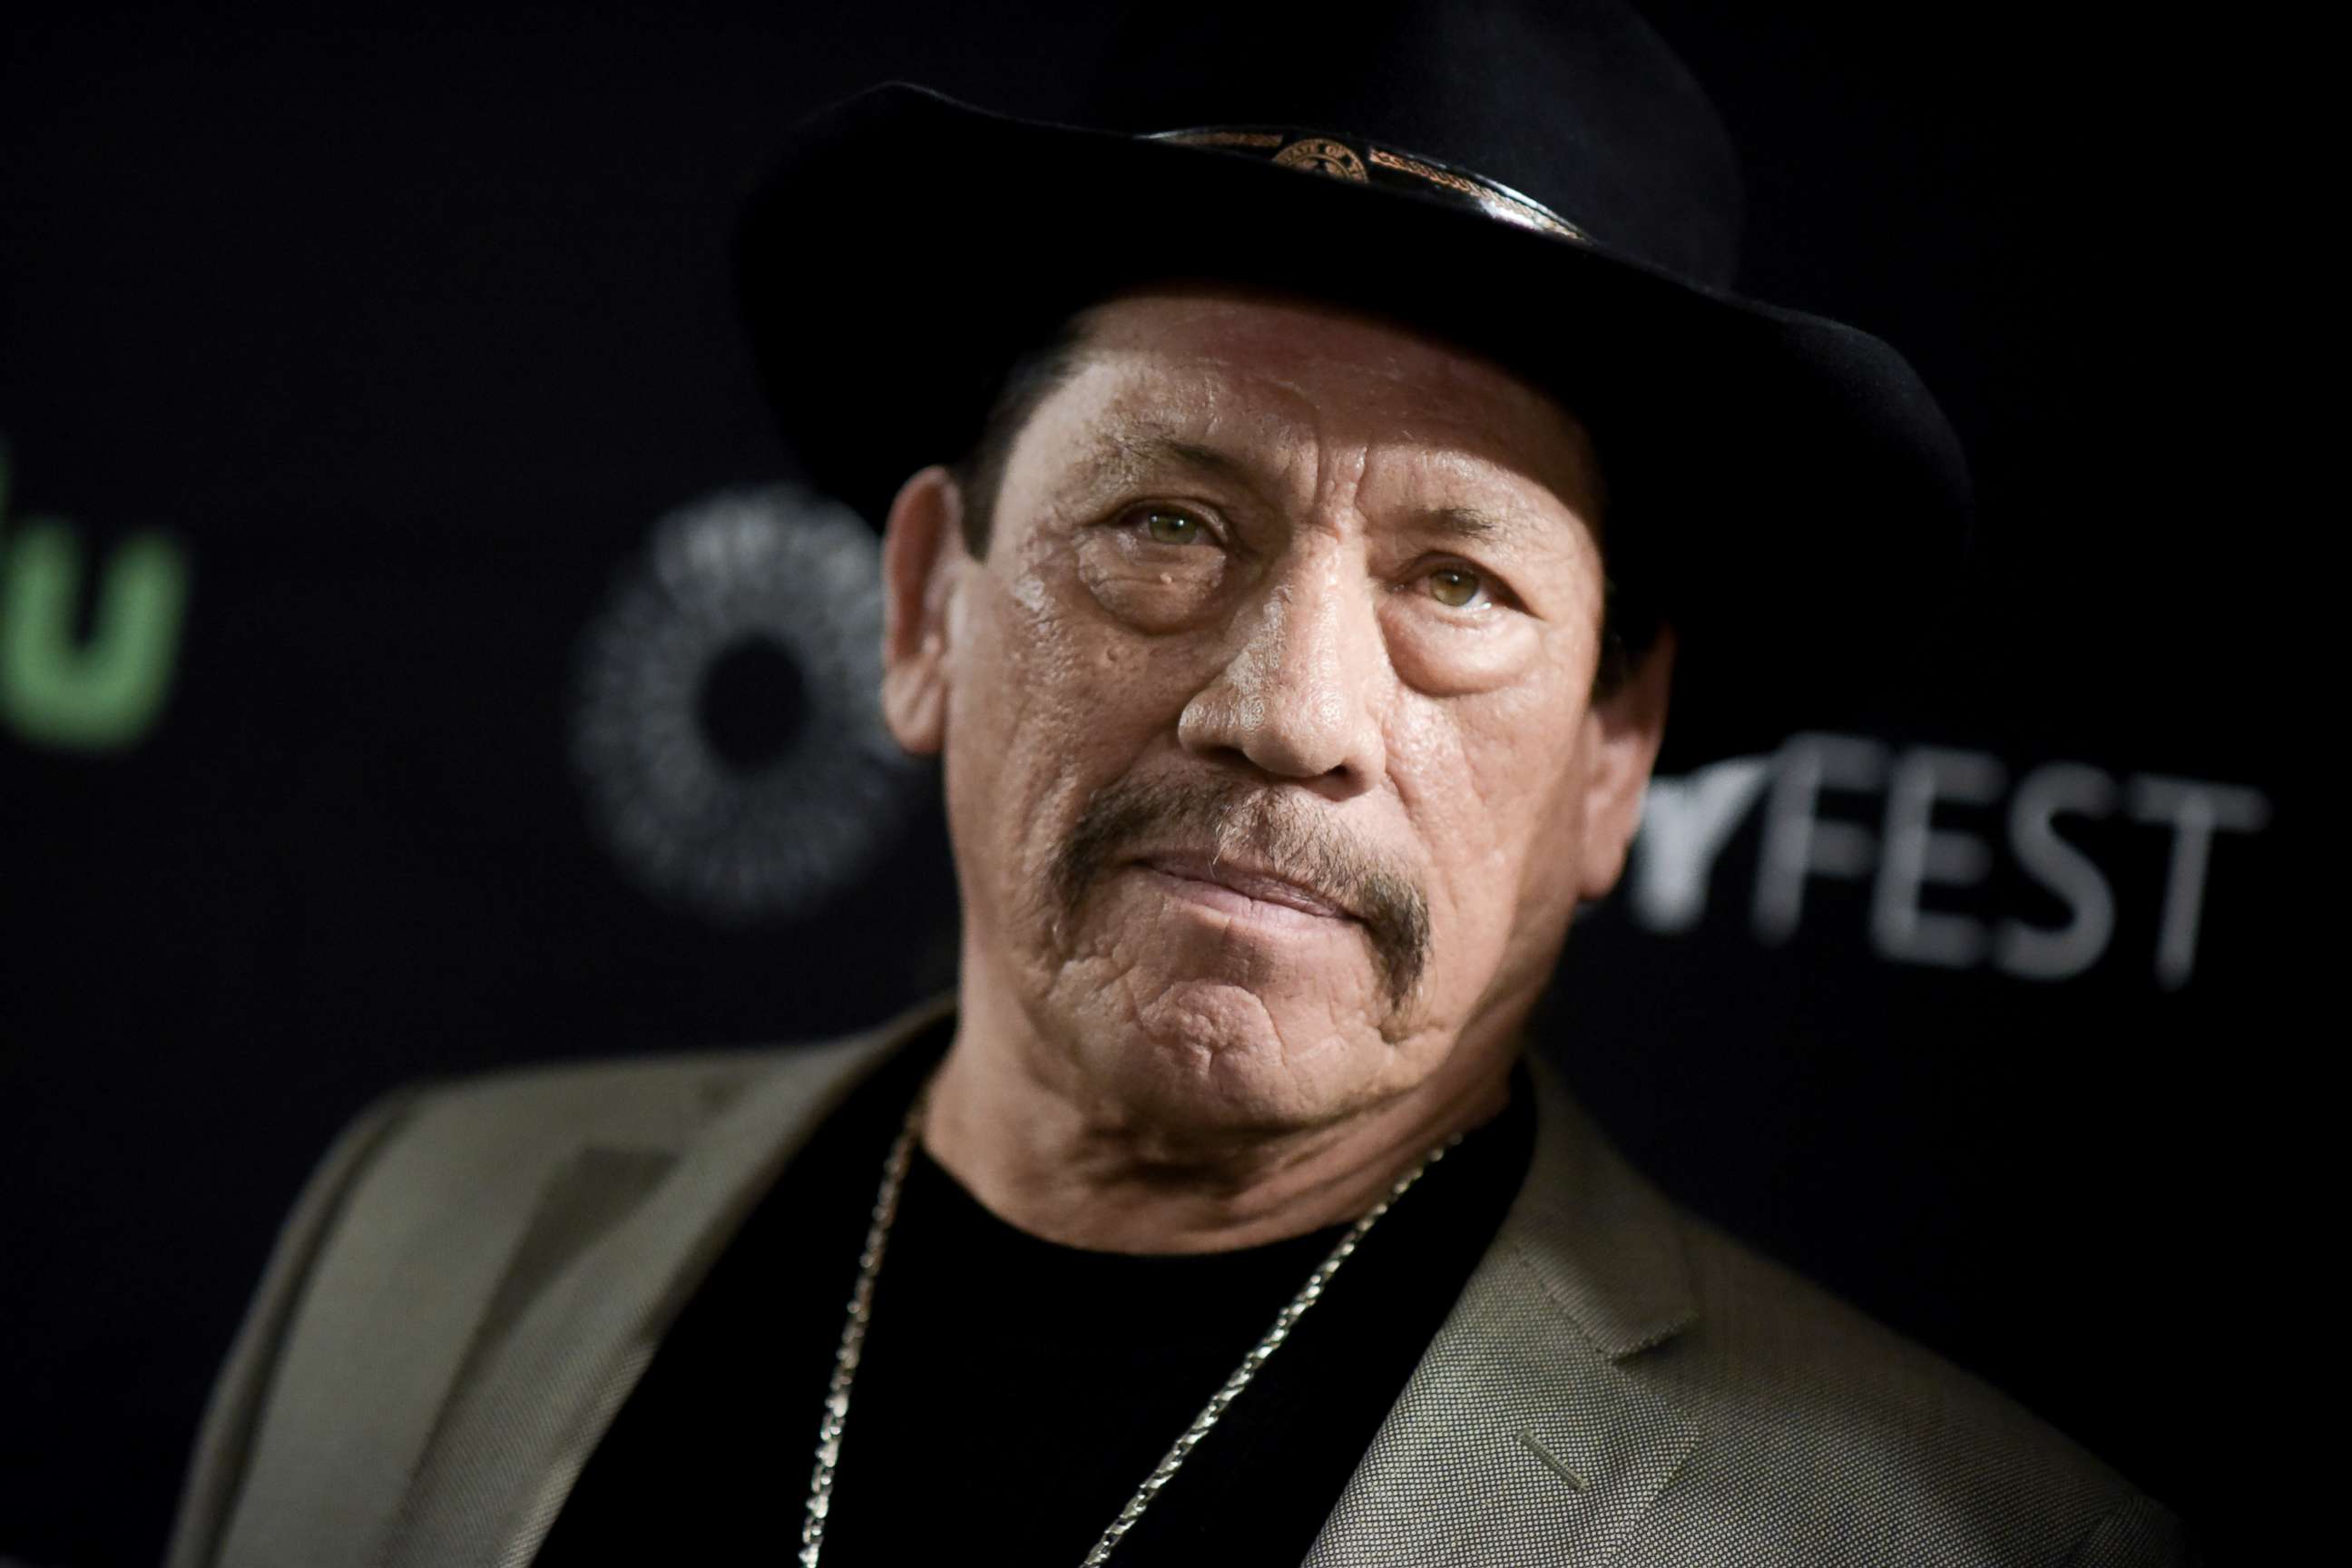 PHOTO: In this Sept. 9, 2016 file photo, Danny Trejo attends the "From Dusk till Dawn: The Series" screening and panel discussion at the 2016 PaleyFest Fall TV Previews in Beverly Hills, Calif.